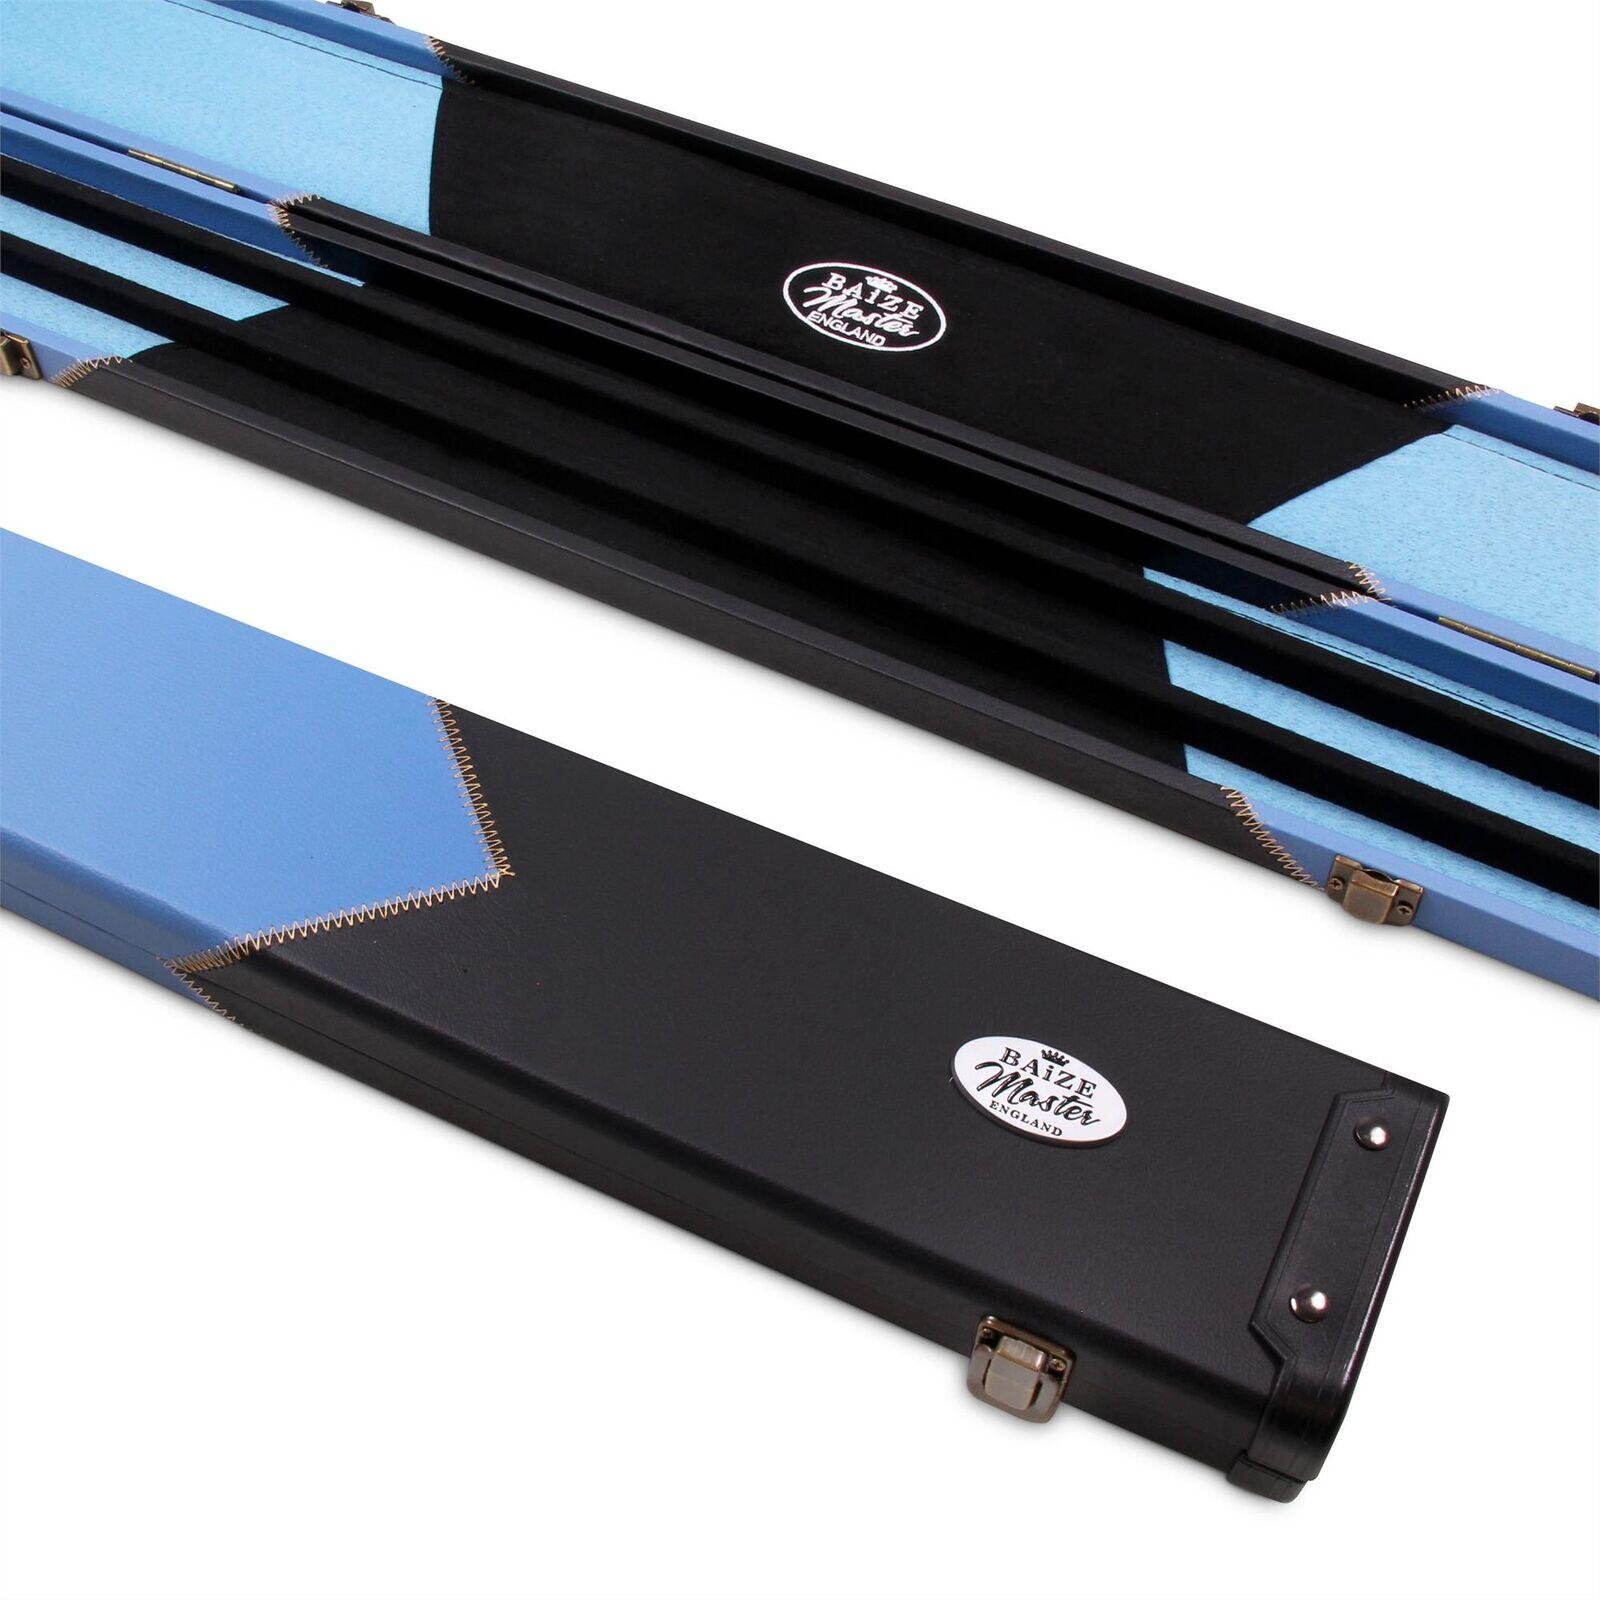 FUNKY CHALK Baize Master 1 Piece WIDE SKY BLUE ARROW Snooker Pool Cue Case - Holds 3 Cues